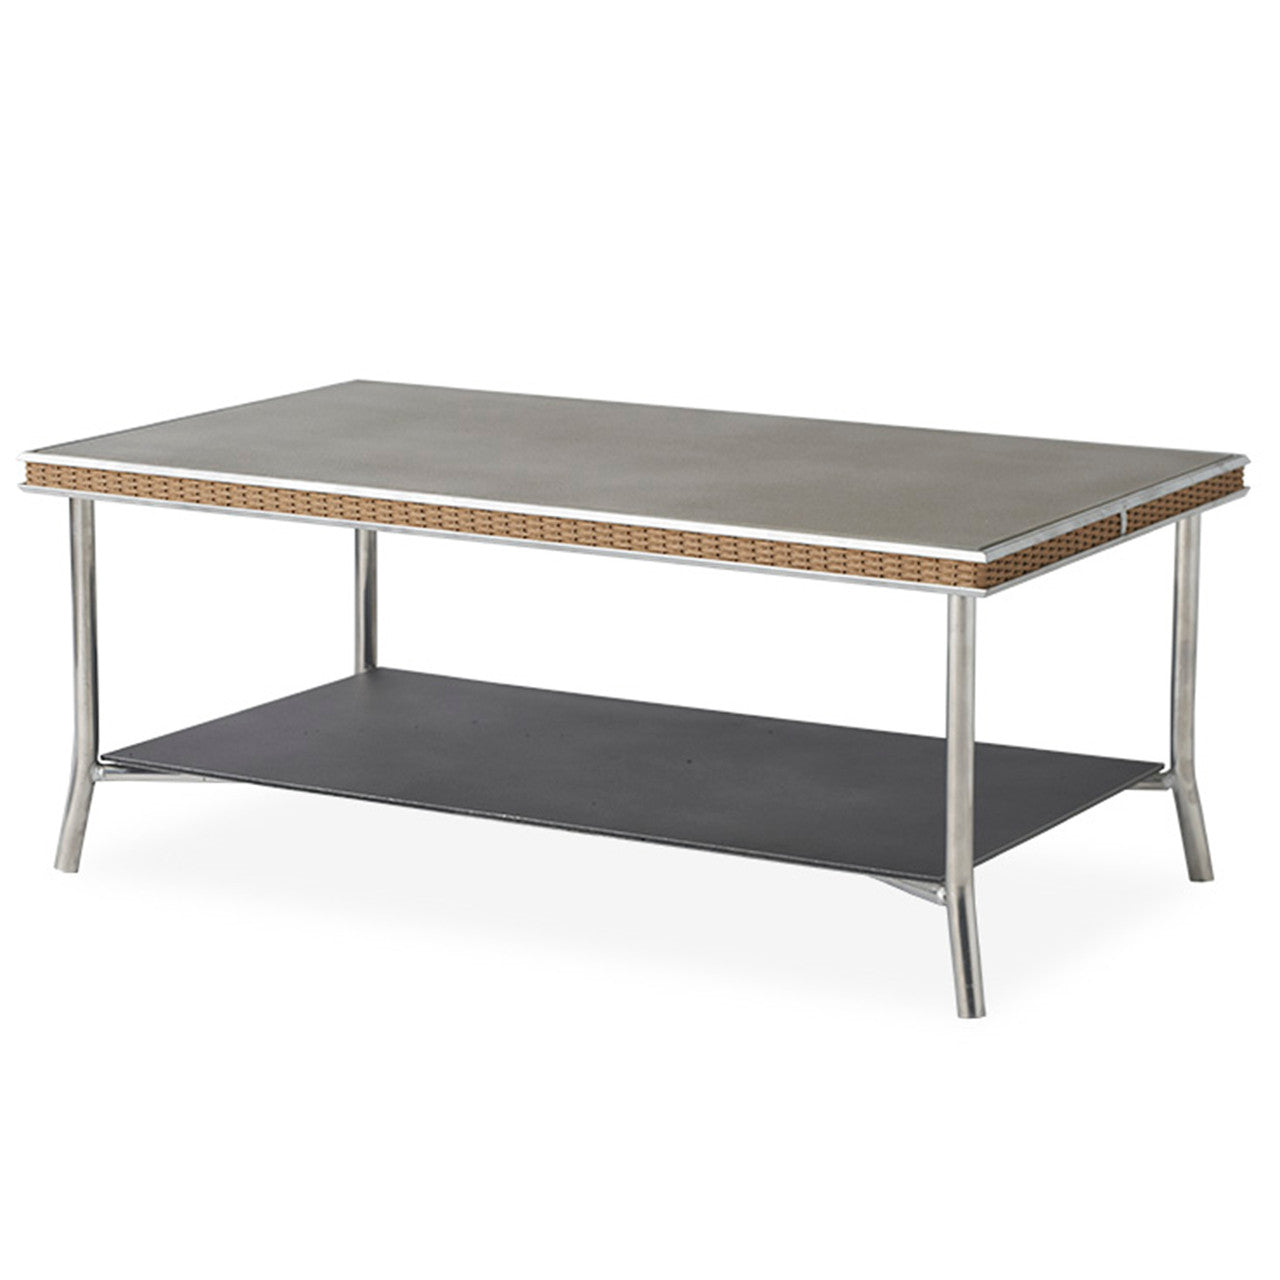 Lloyd Flanders Visions 42" Rectangular Cocktail Table with Taupe Glass